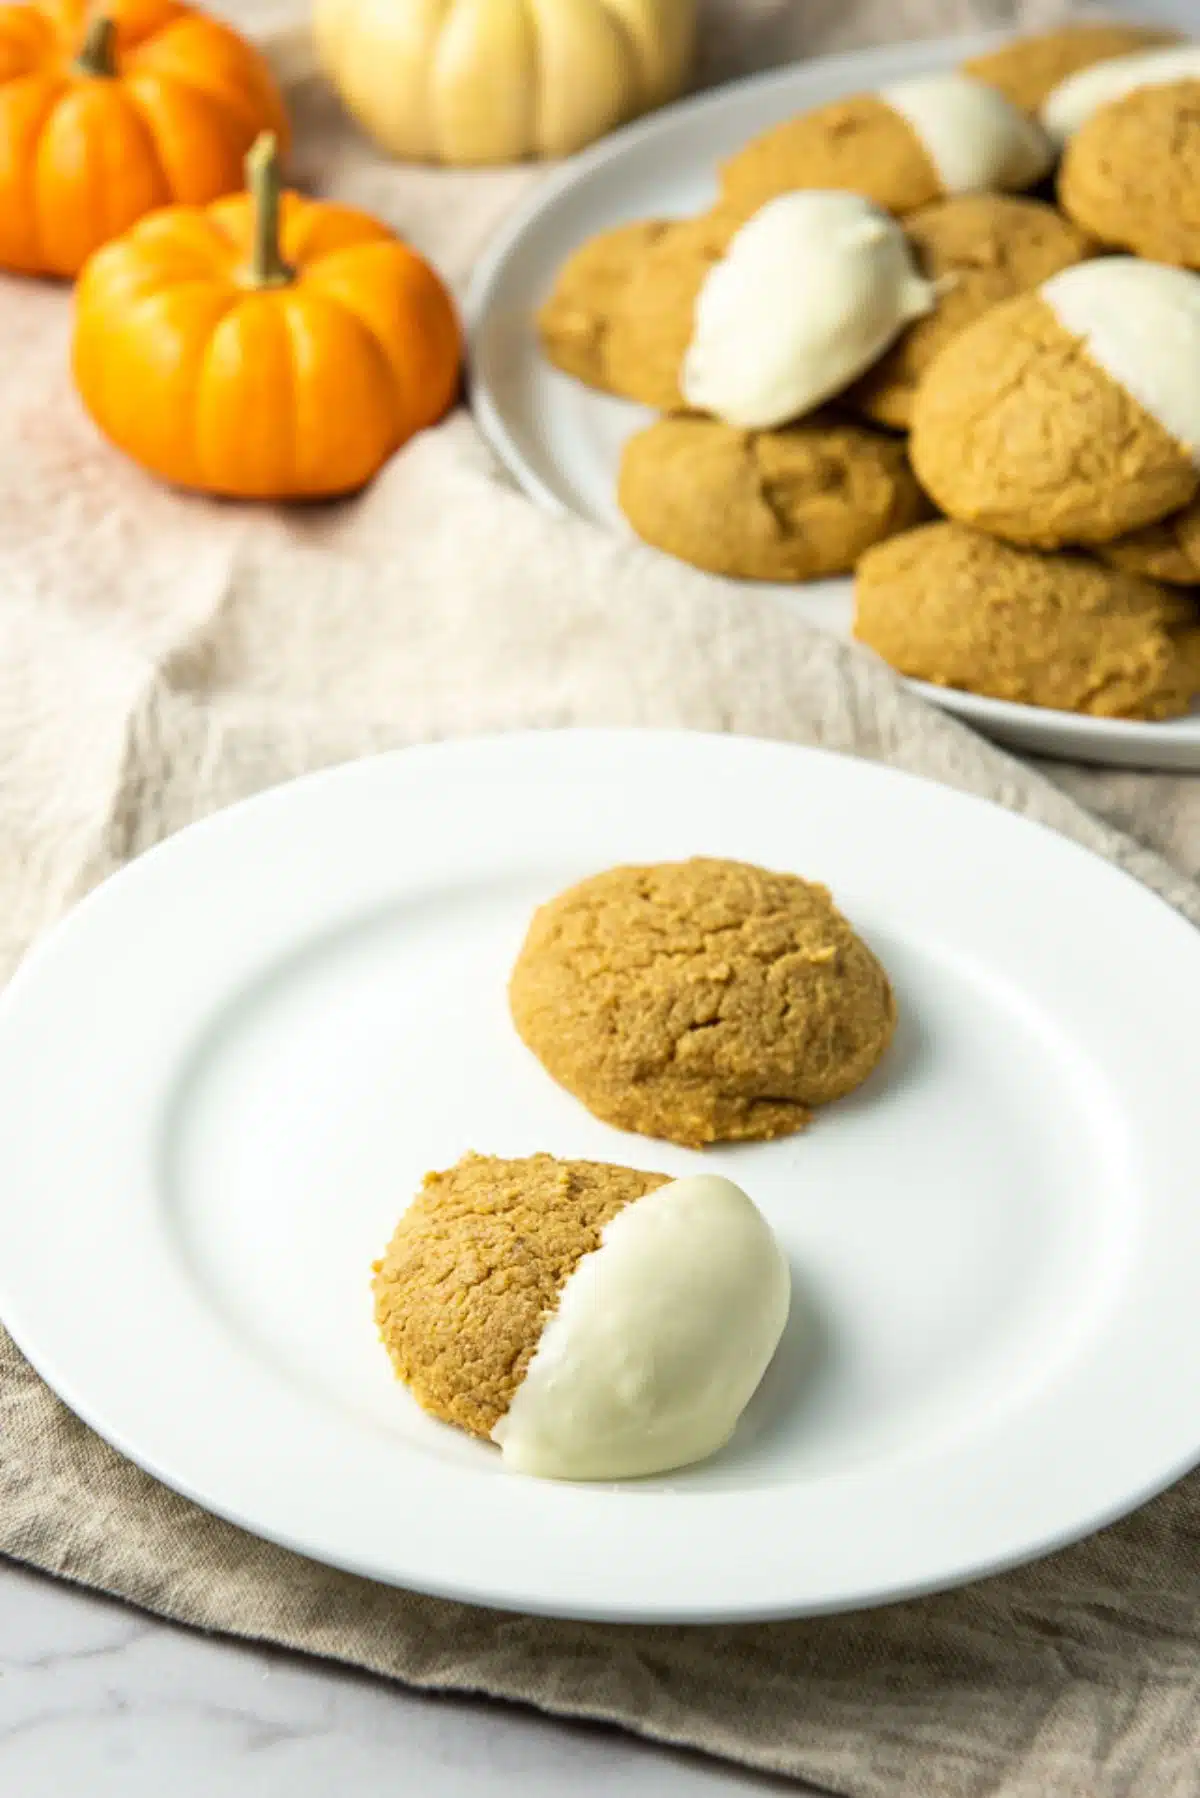 Close up of a plate of two pumpkin cookies, one plain and one dipped in white chocolate